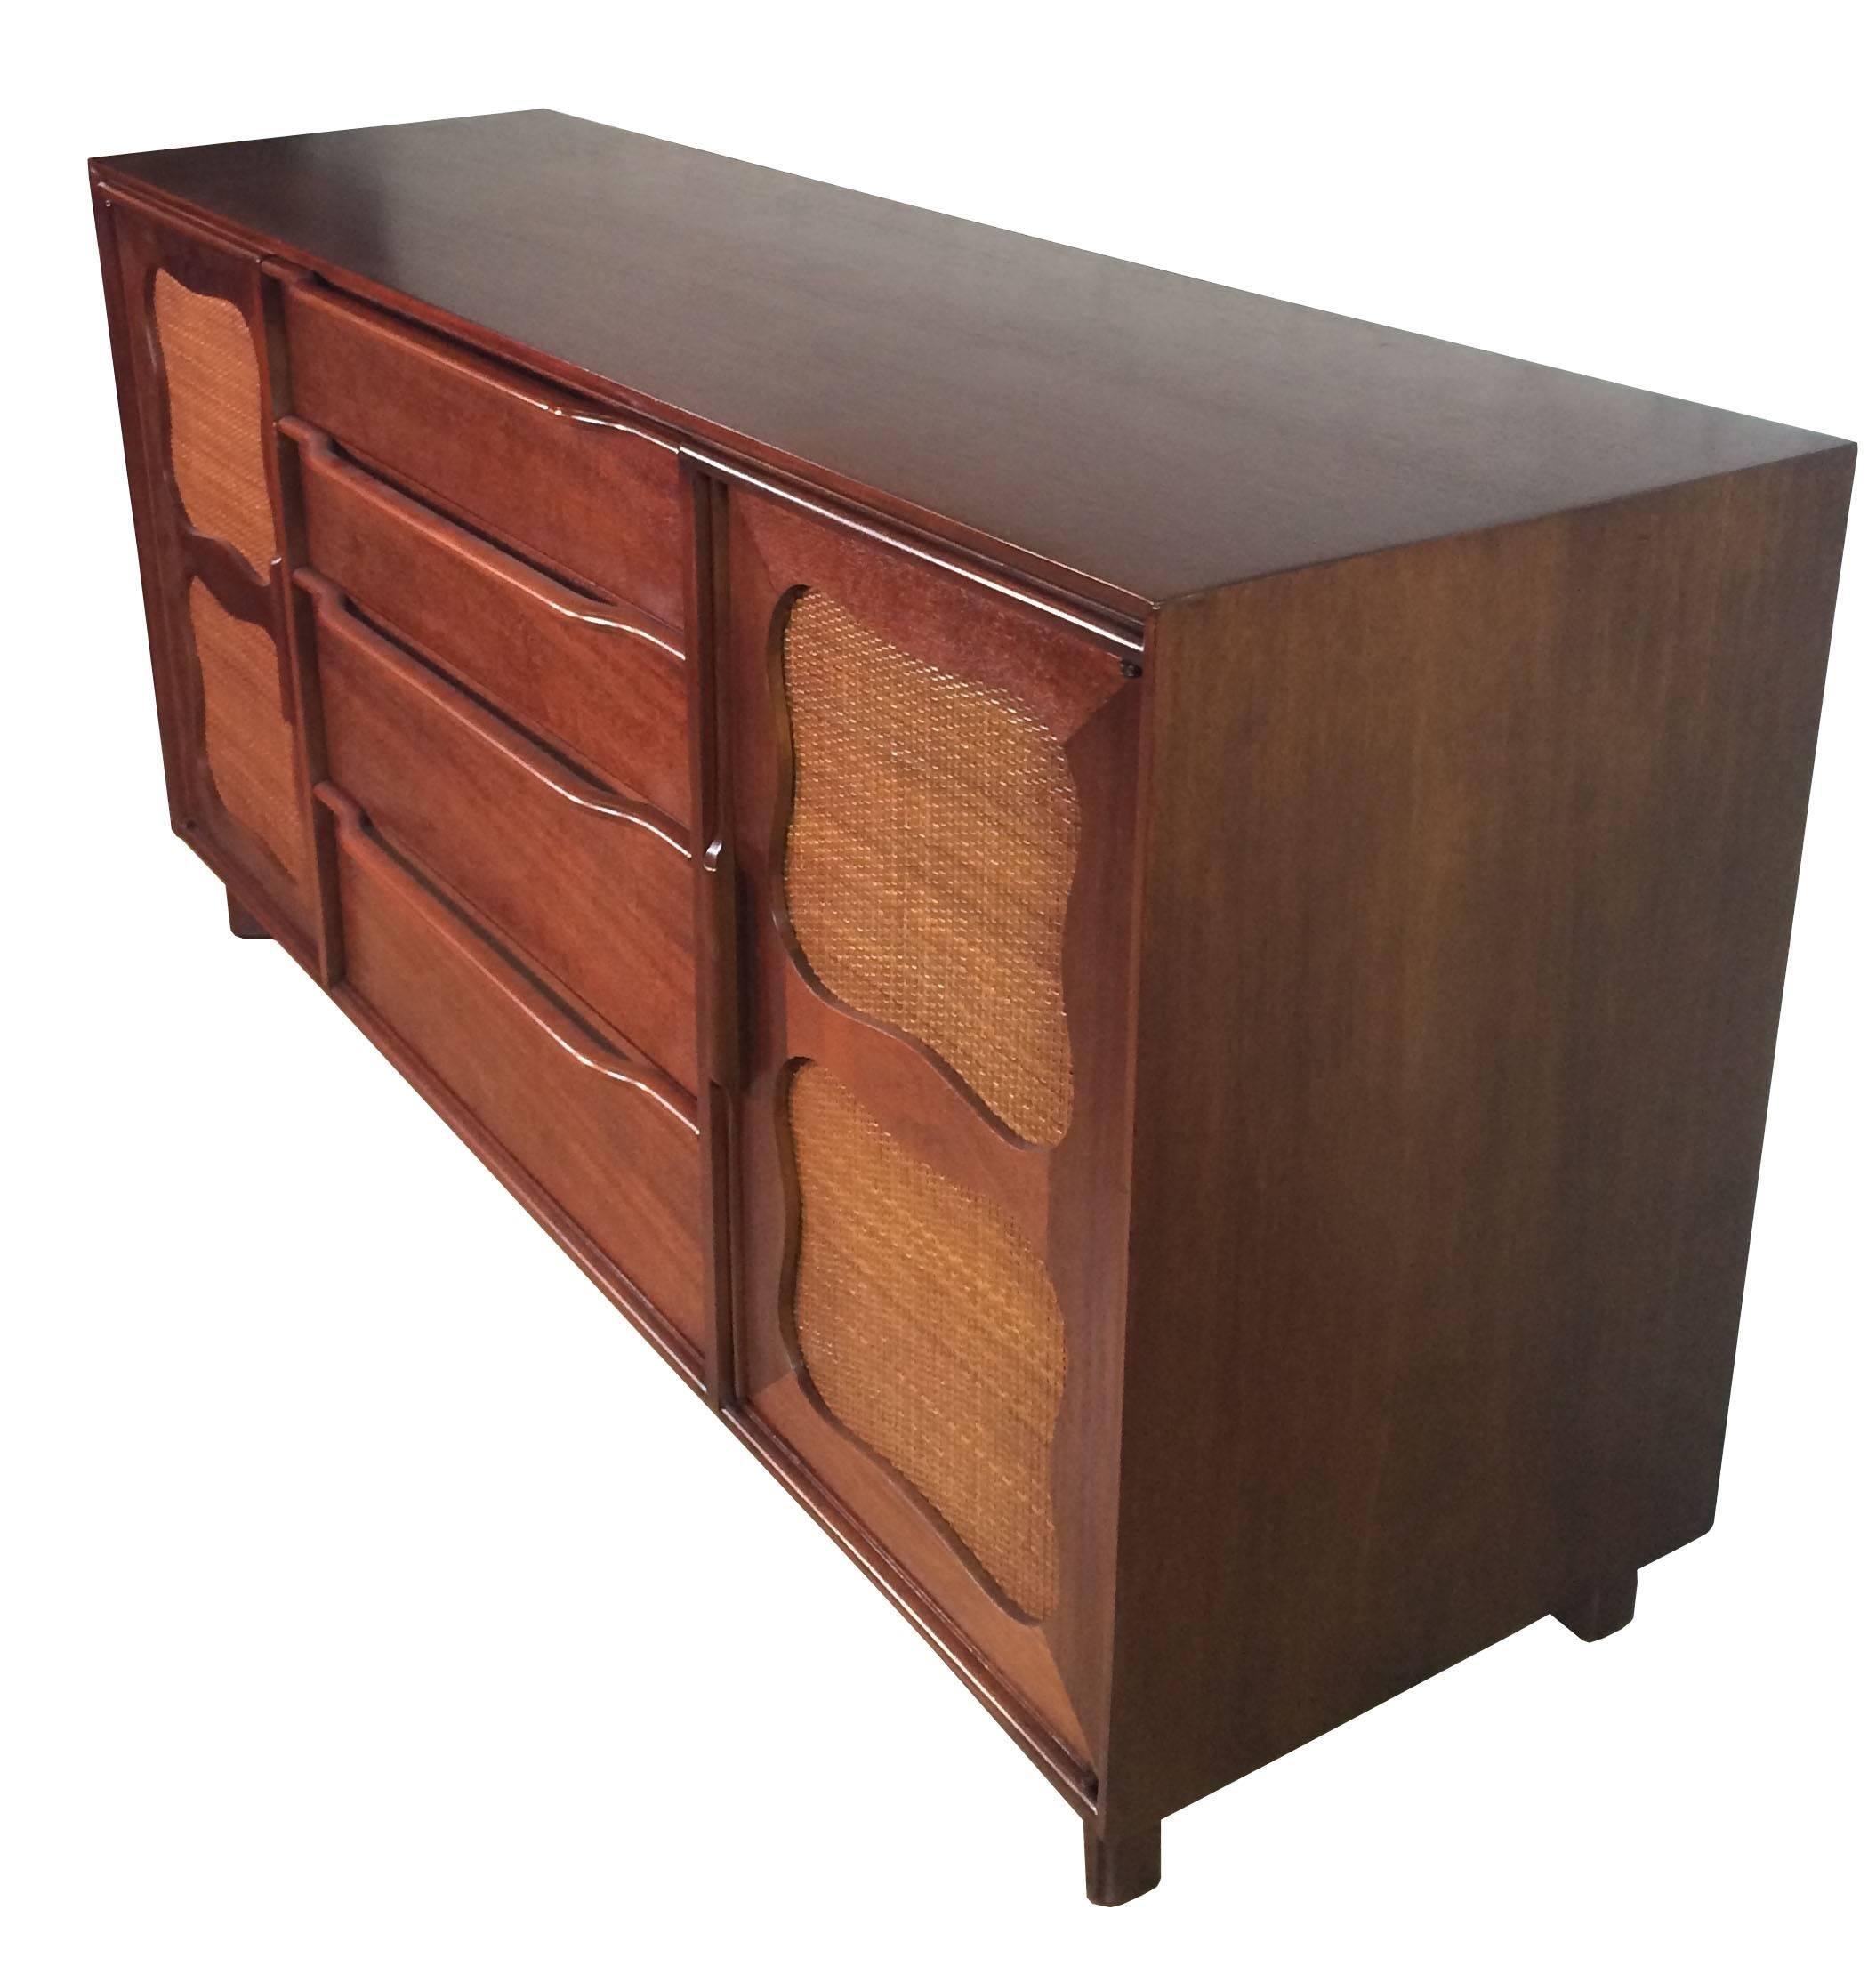 Mid-century, mahogany credenza / sideboard / server by Hickory Manufacturing Company with 4 center drawers, top one has 5 felted compartments, and 2 side doors with decorative rattan details with shelves inside and matching sculpted handles and legs